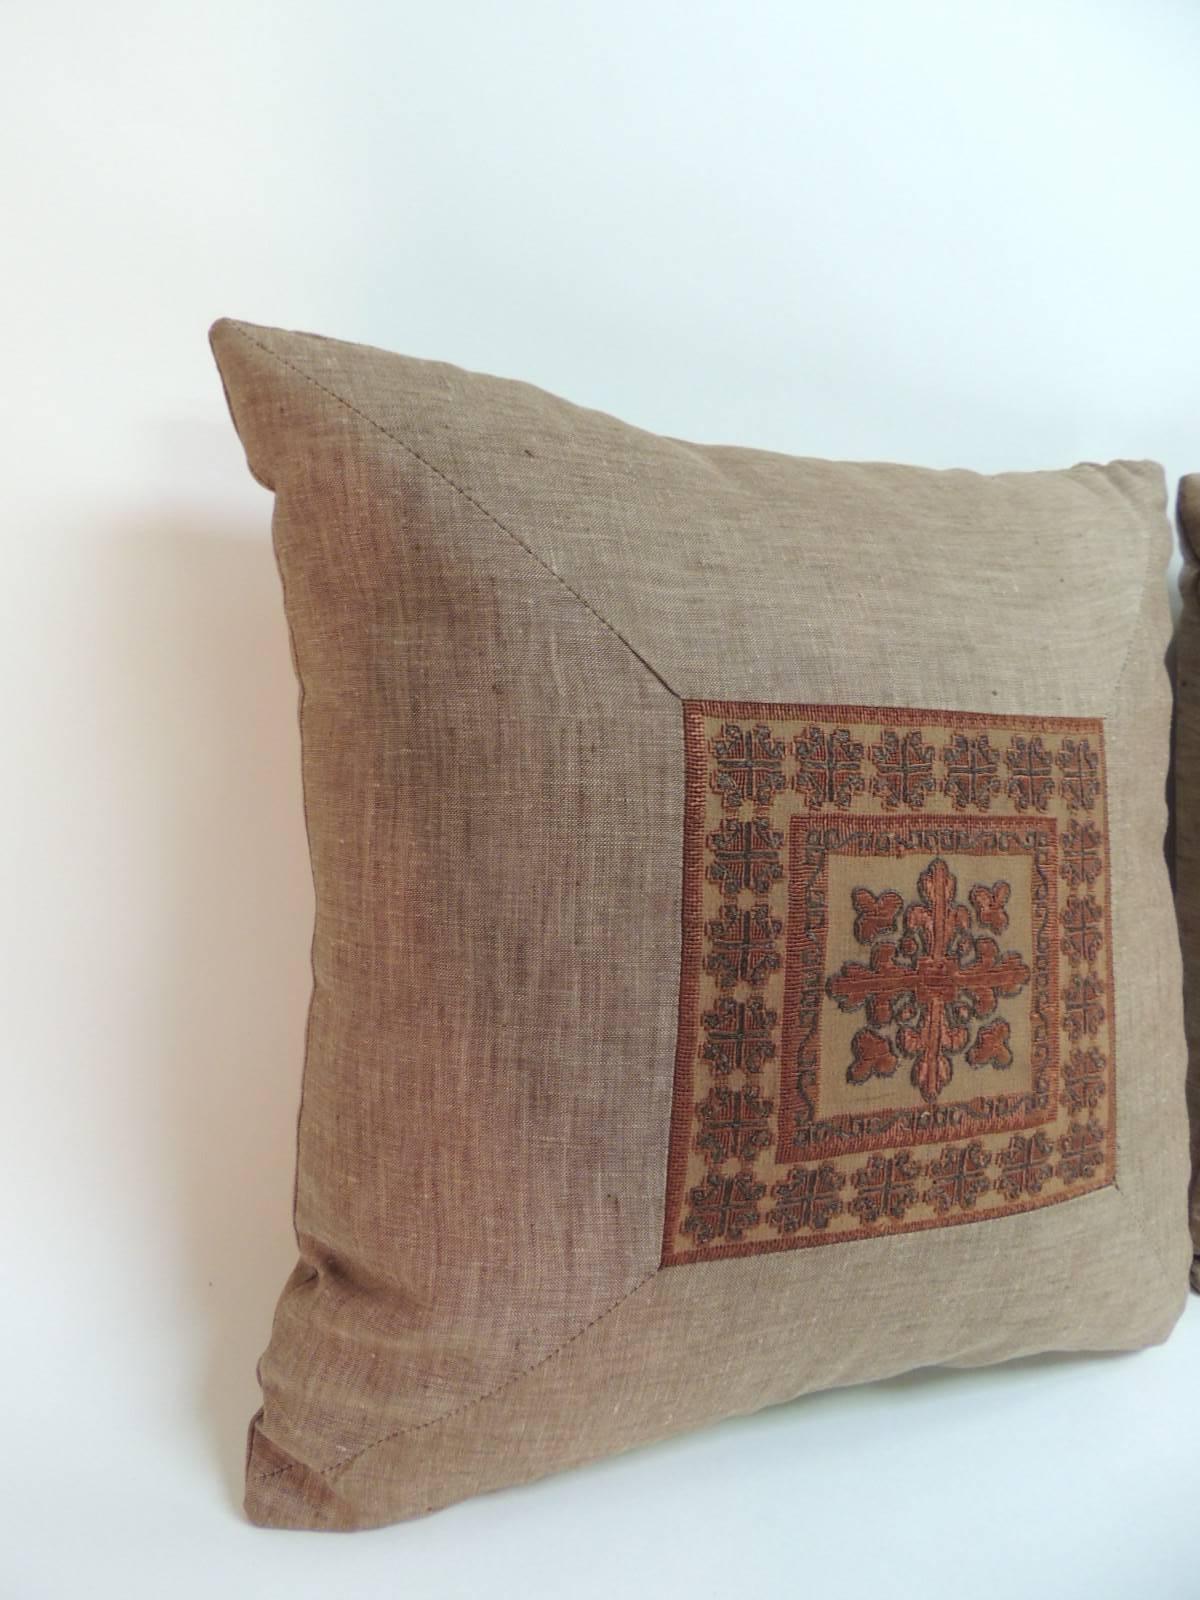 Pair of 19th century Persian decorative pillows with silk threads embroidered on sheer tulle and framed with textured brown vintage linen same as backing. The center embroidered square, (6.5” by 6.5” measurement) depicts a stylized fleur de lis